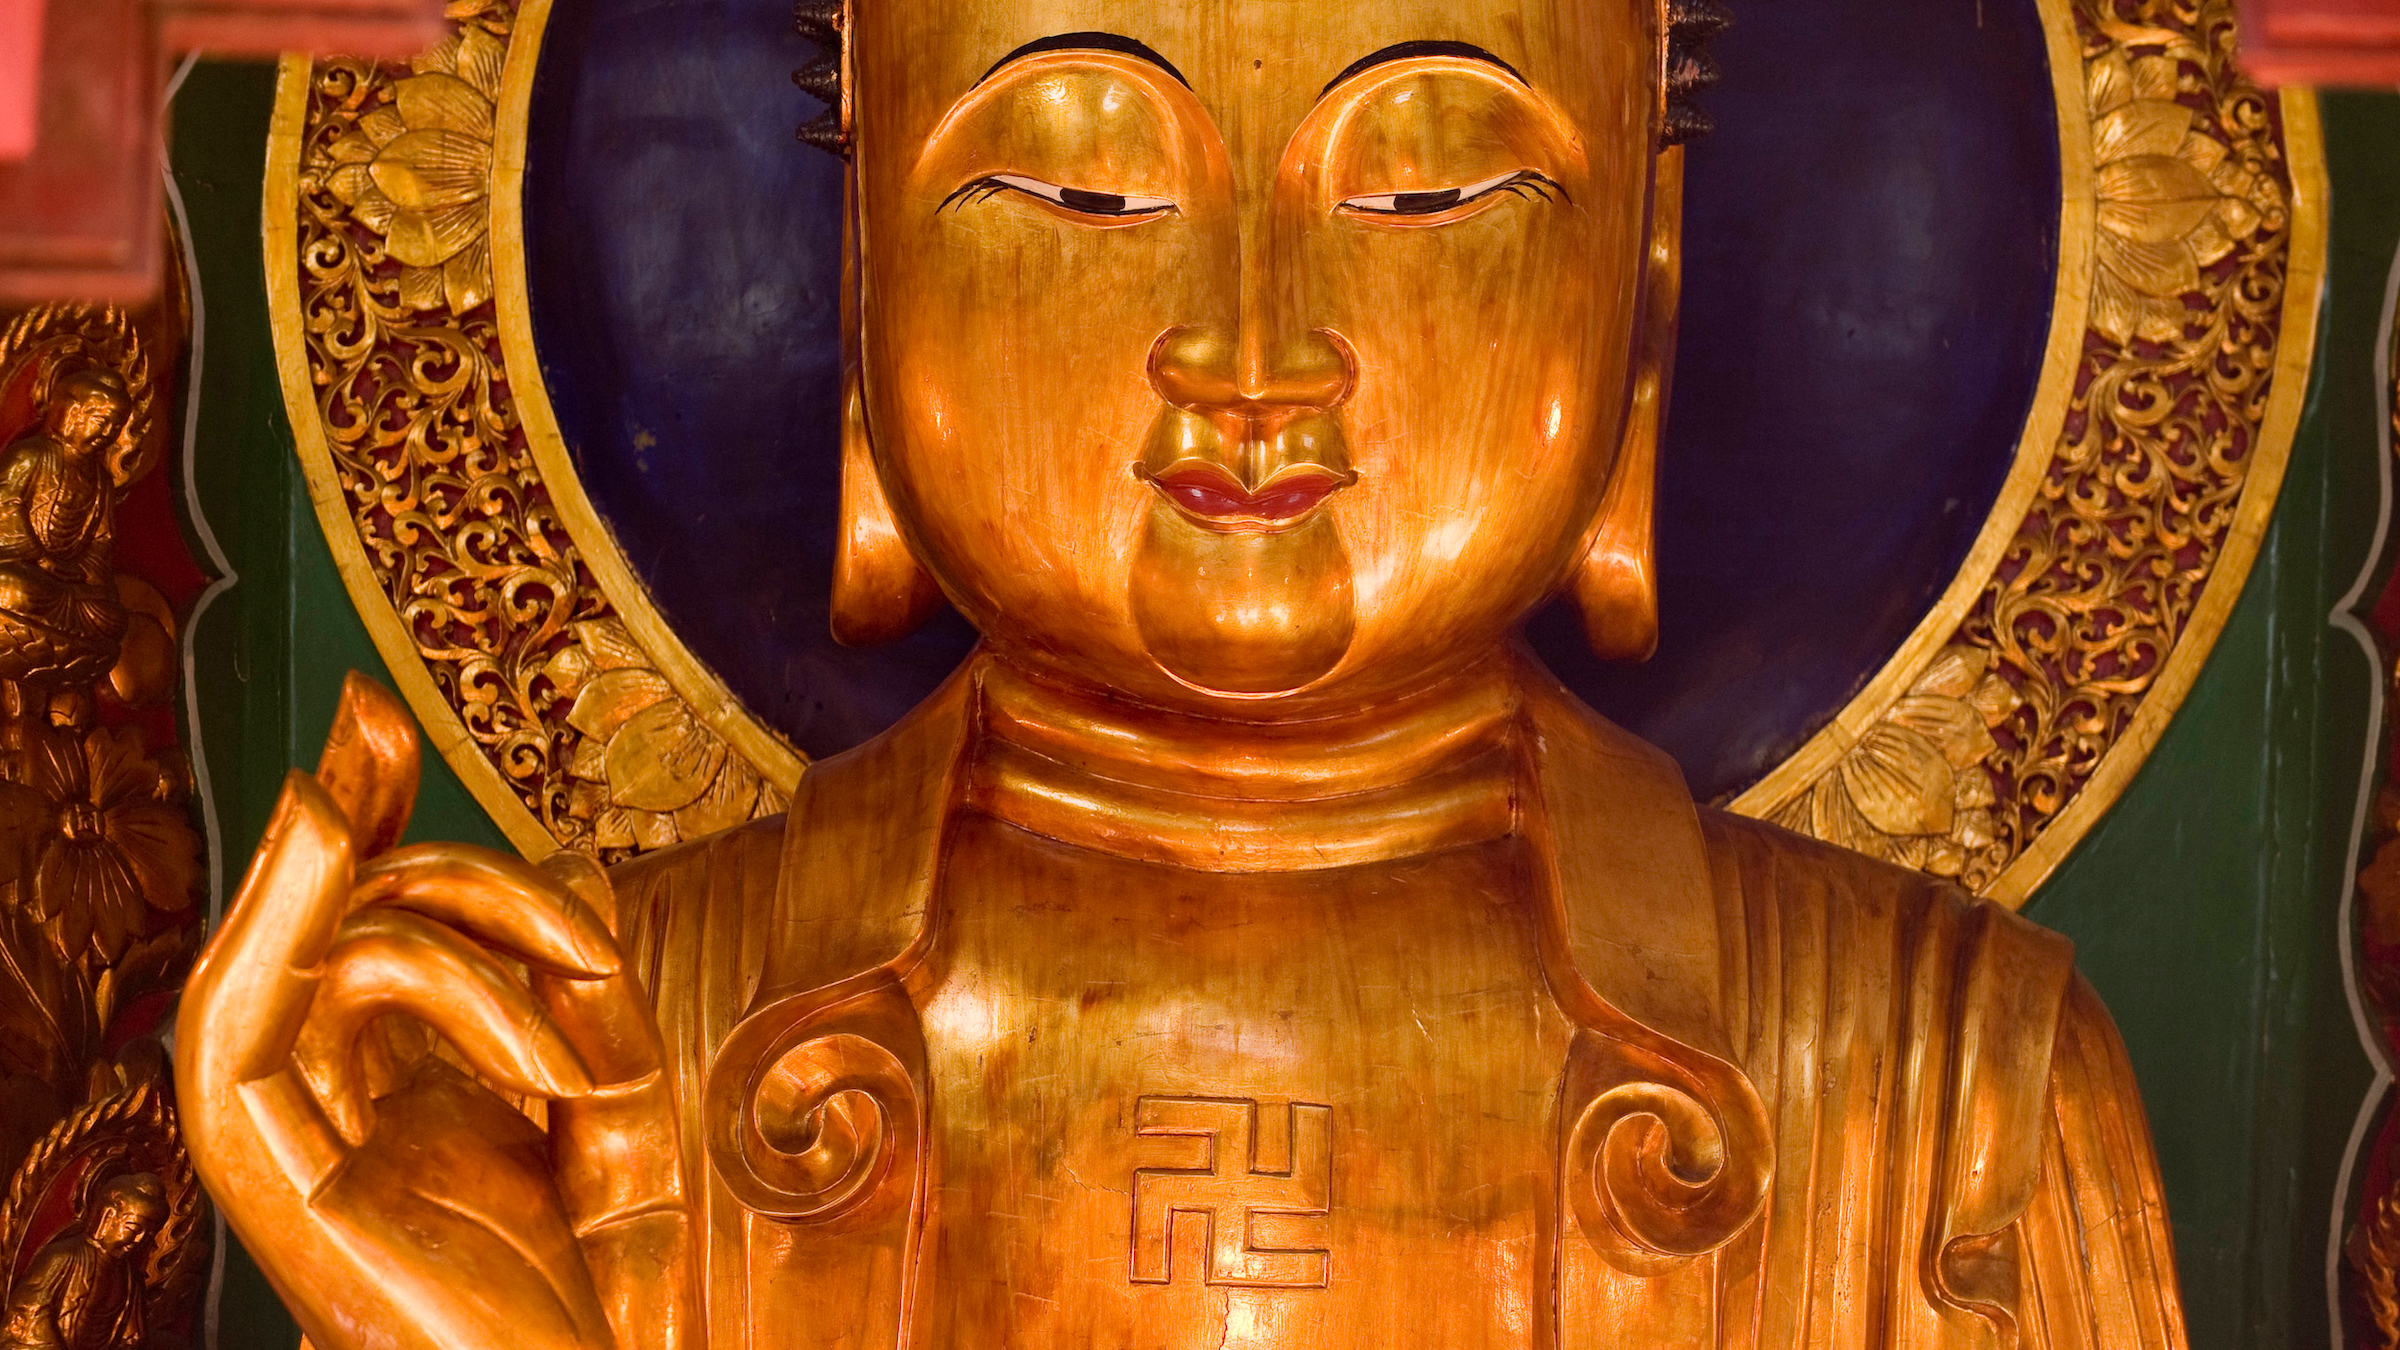 We see a golden statue of Buddha, who has a swastika on his chest.